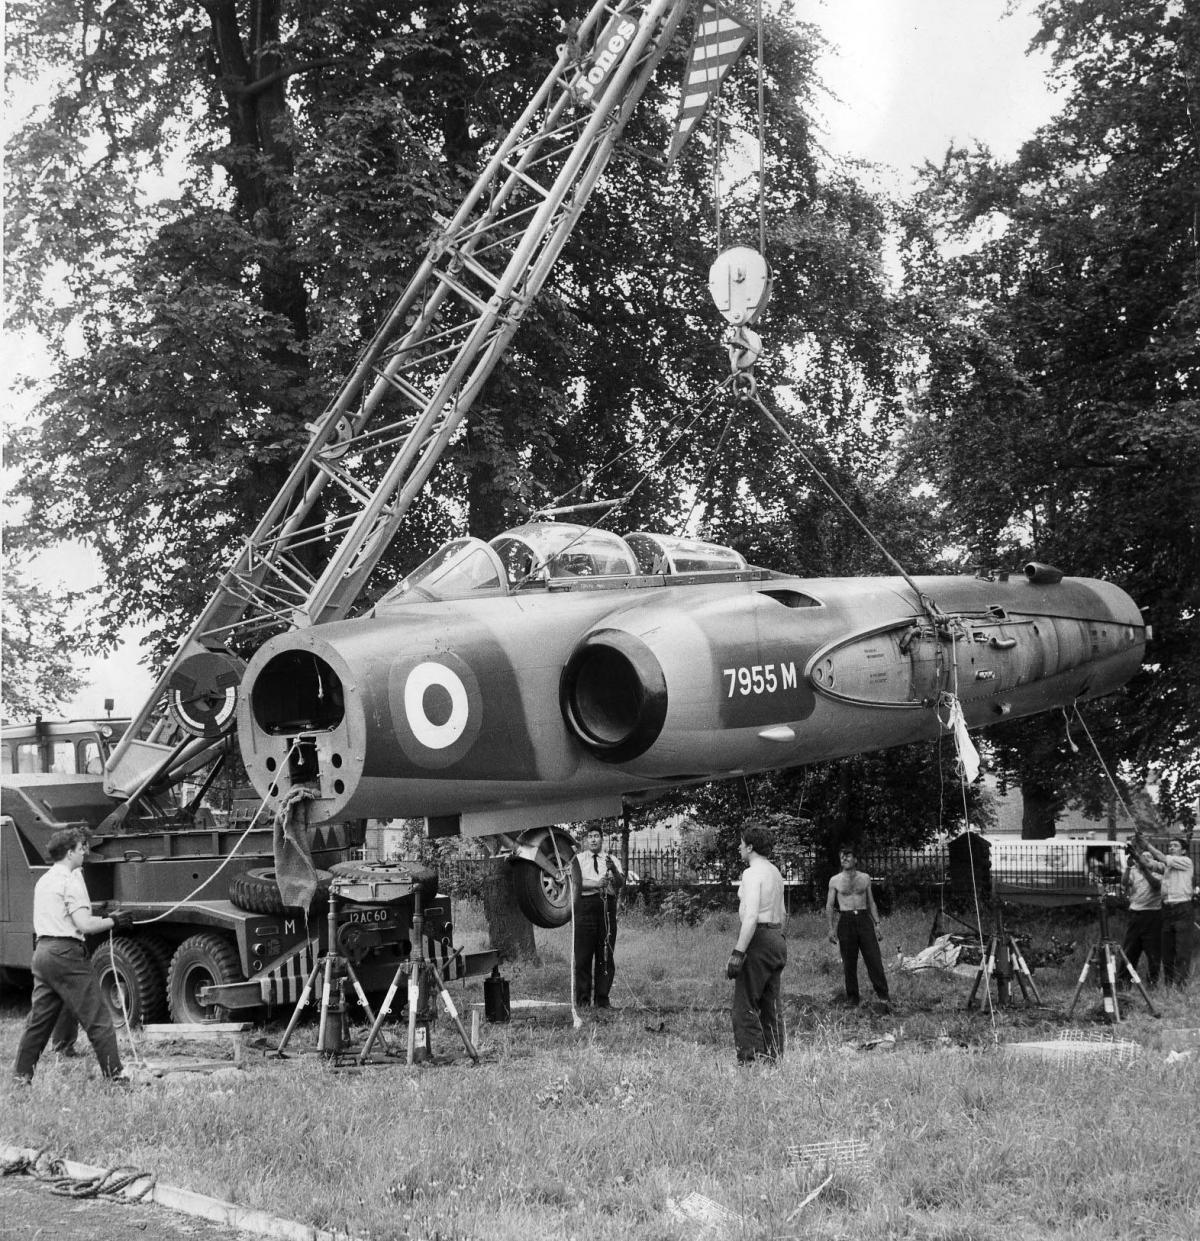 CHOCS Away…..In August 1987, RAF officers and cadets bid a fond farewell to a fighter aircraft which stood guard in the city for more than 20 years. The Gloster Javelin at Perdiswell was moved to a new home in a Surrey museum after being sold for an und